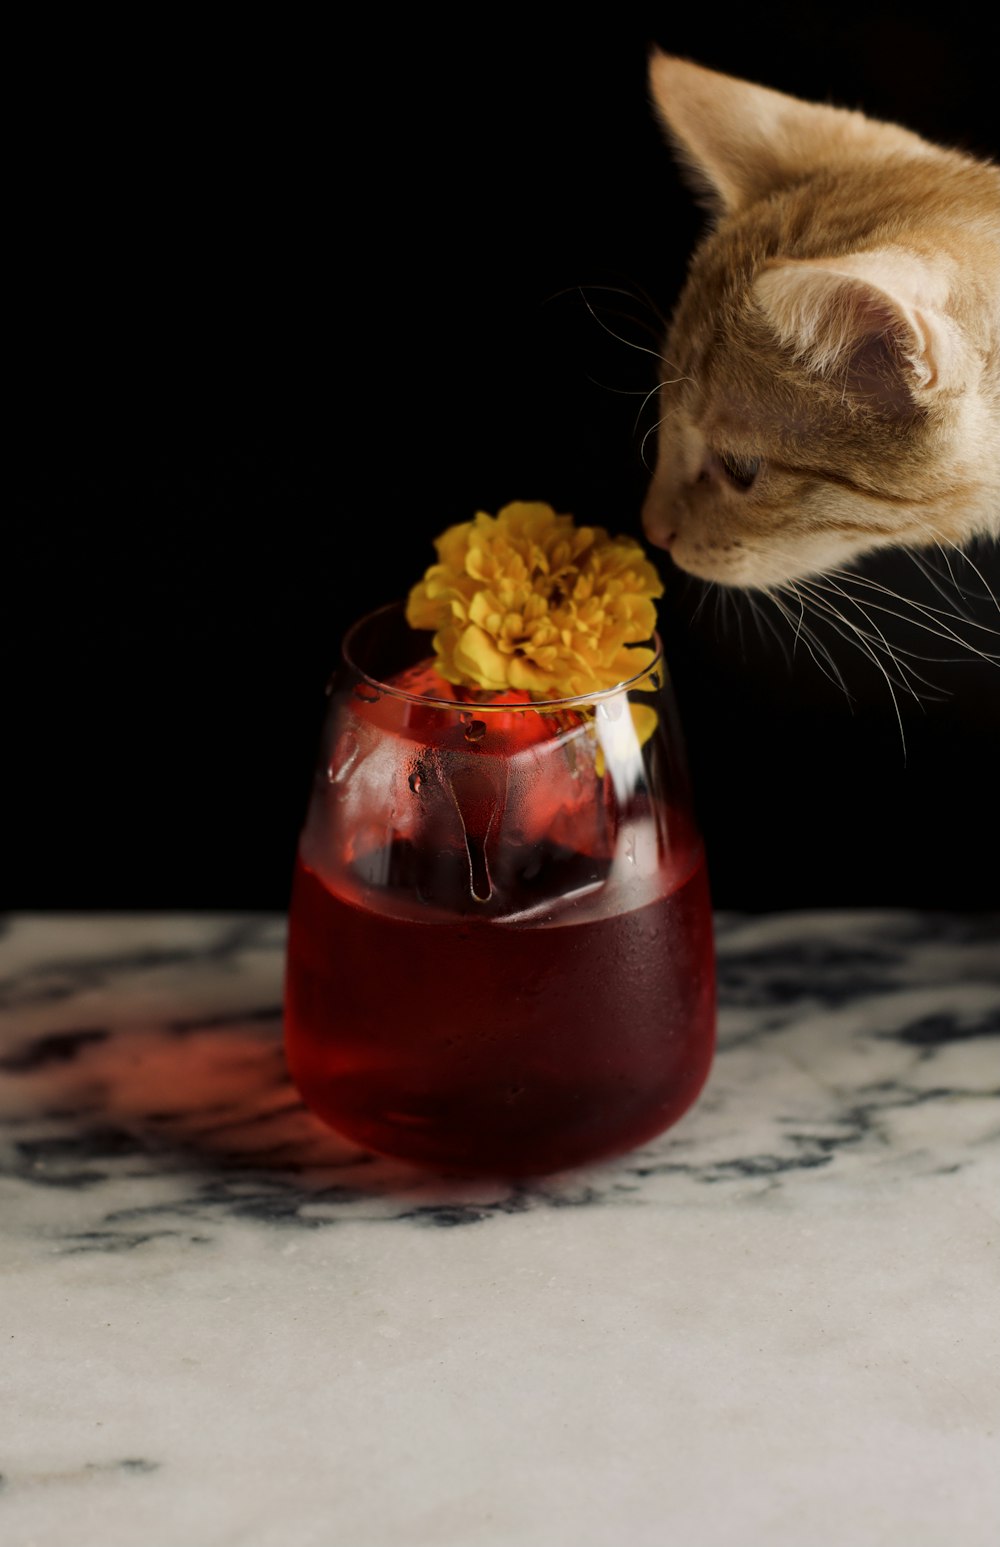 orange tabby cat in front of clear glass jar with red liquid